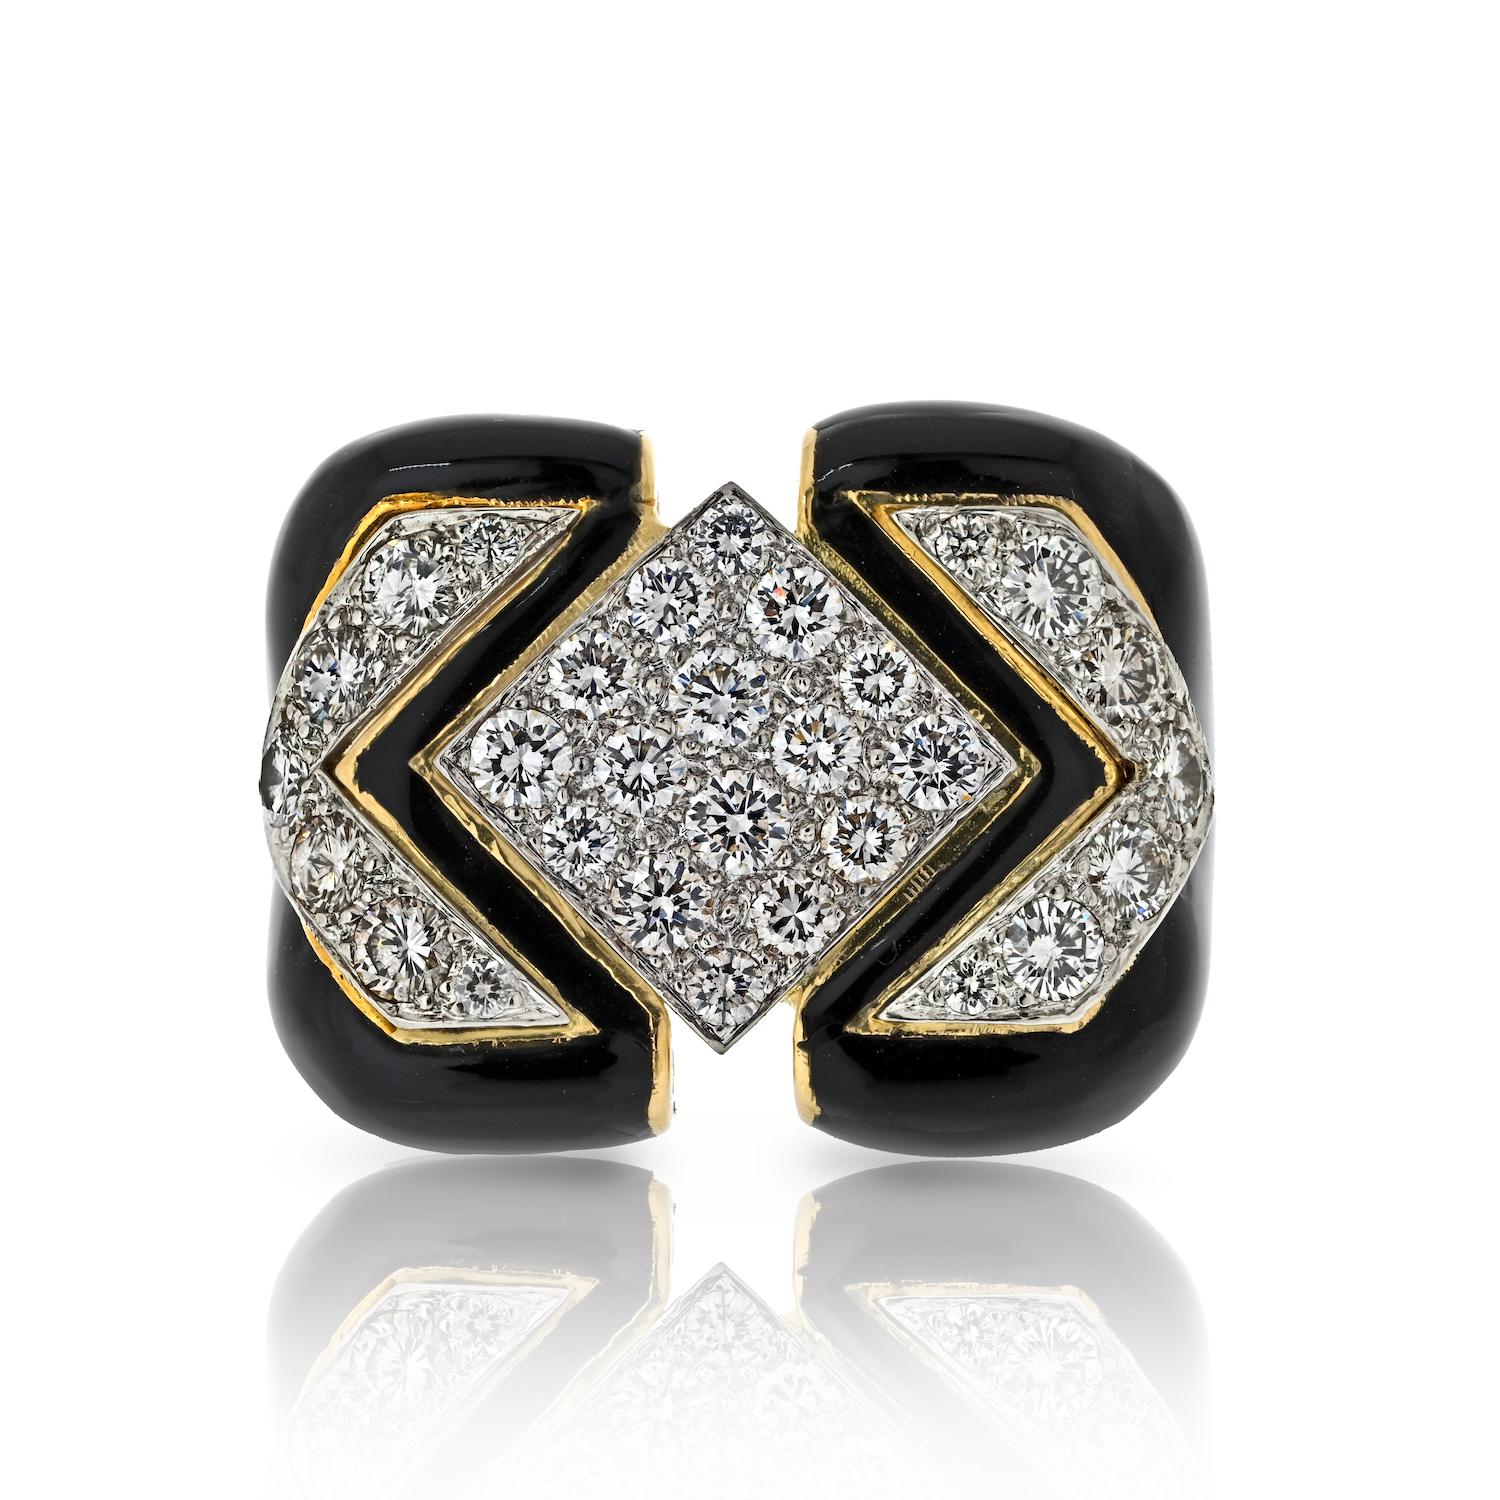 Step into the world of timeless glamour with our Vintage David Webb Manhattan Minimalism ring. This exquisite piece marries elegance and boldness, featuring captivating black enamel accentuated by a stunning constellation of 30 round diamonds that